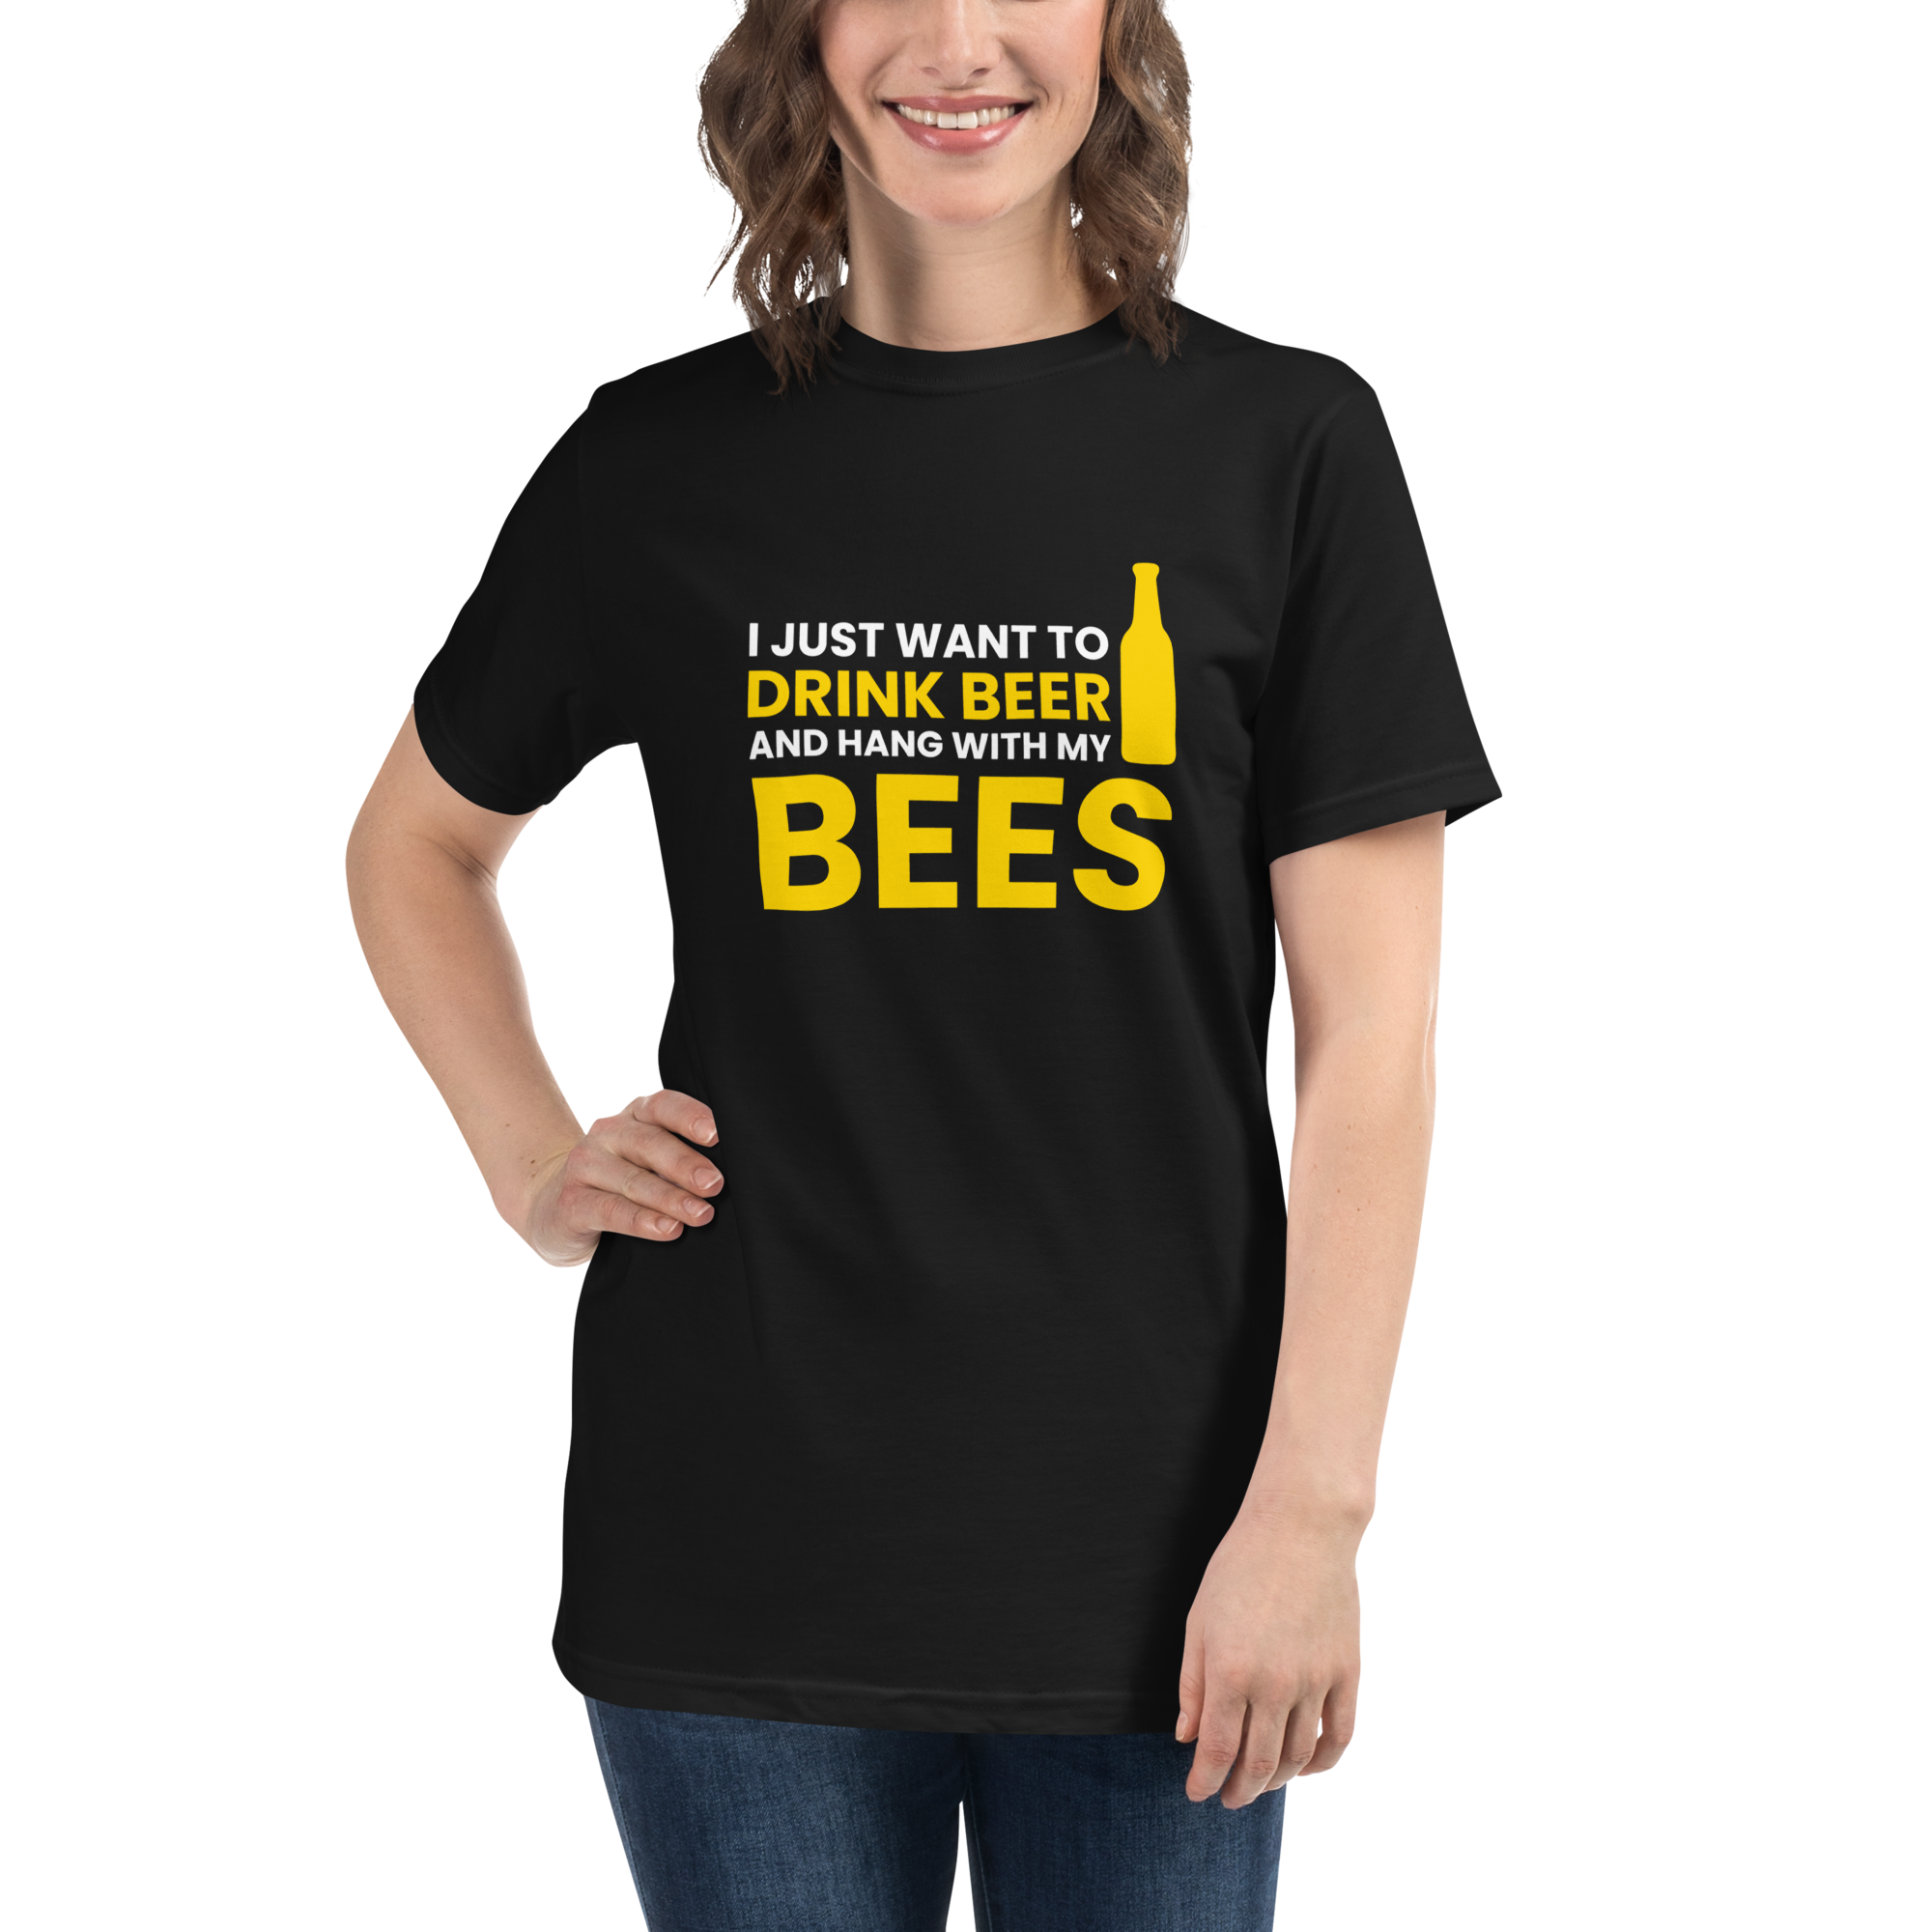 Organic 'Drink Beer & Hang with Bees' T-Shirt